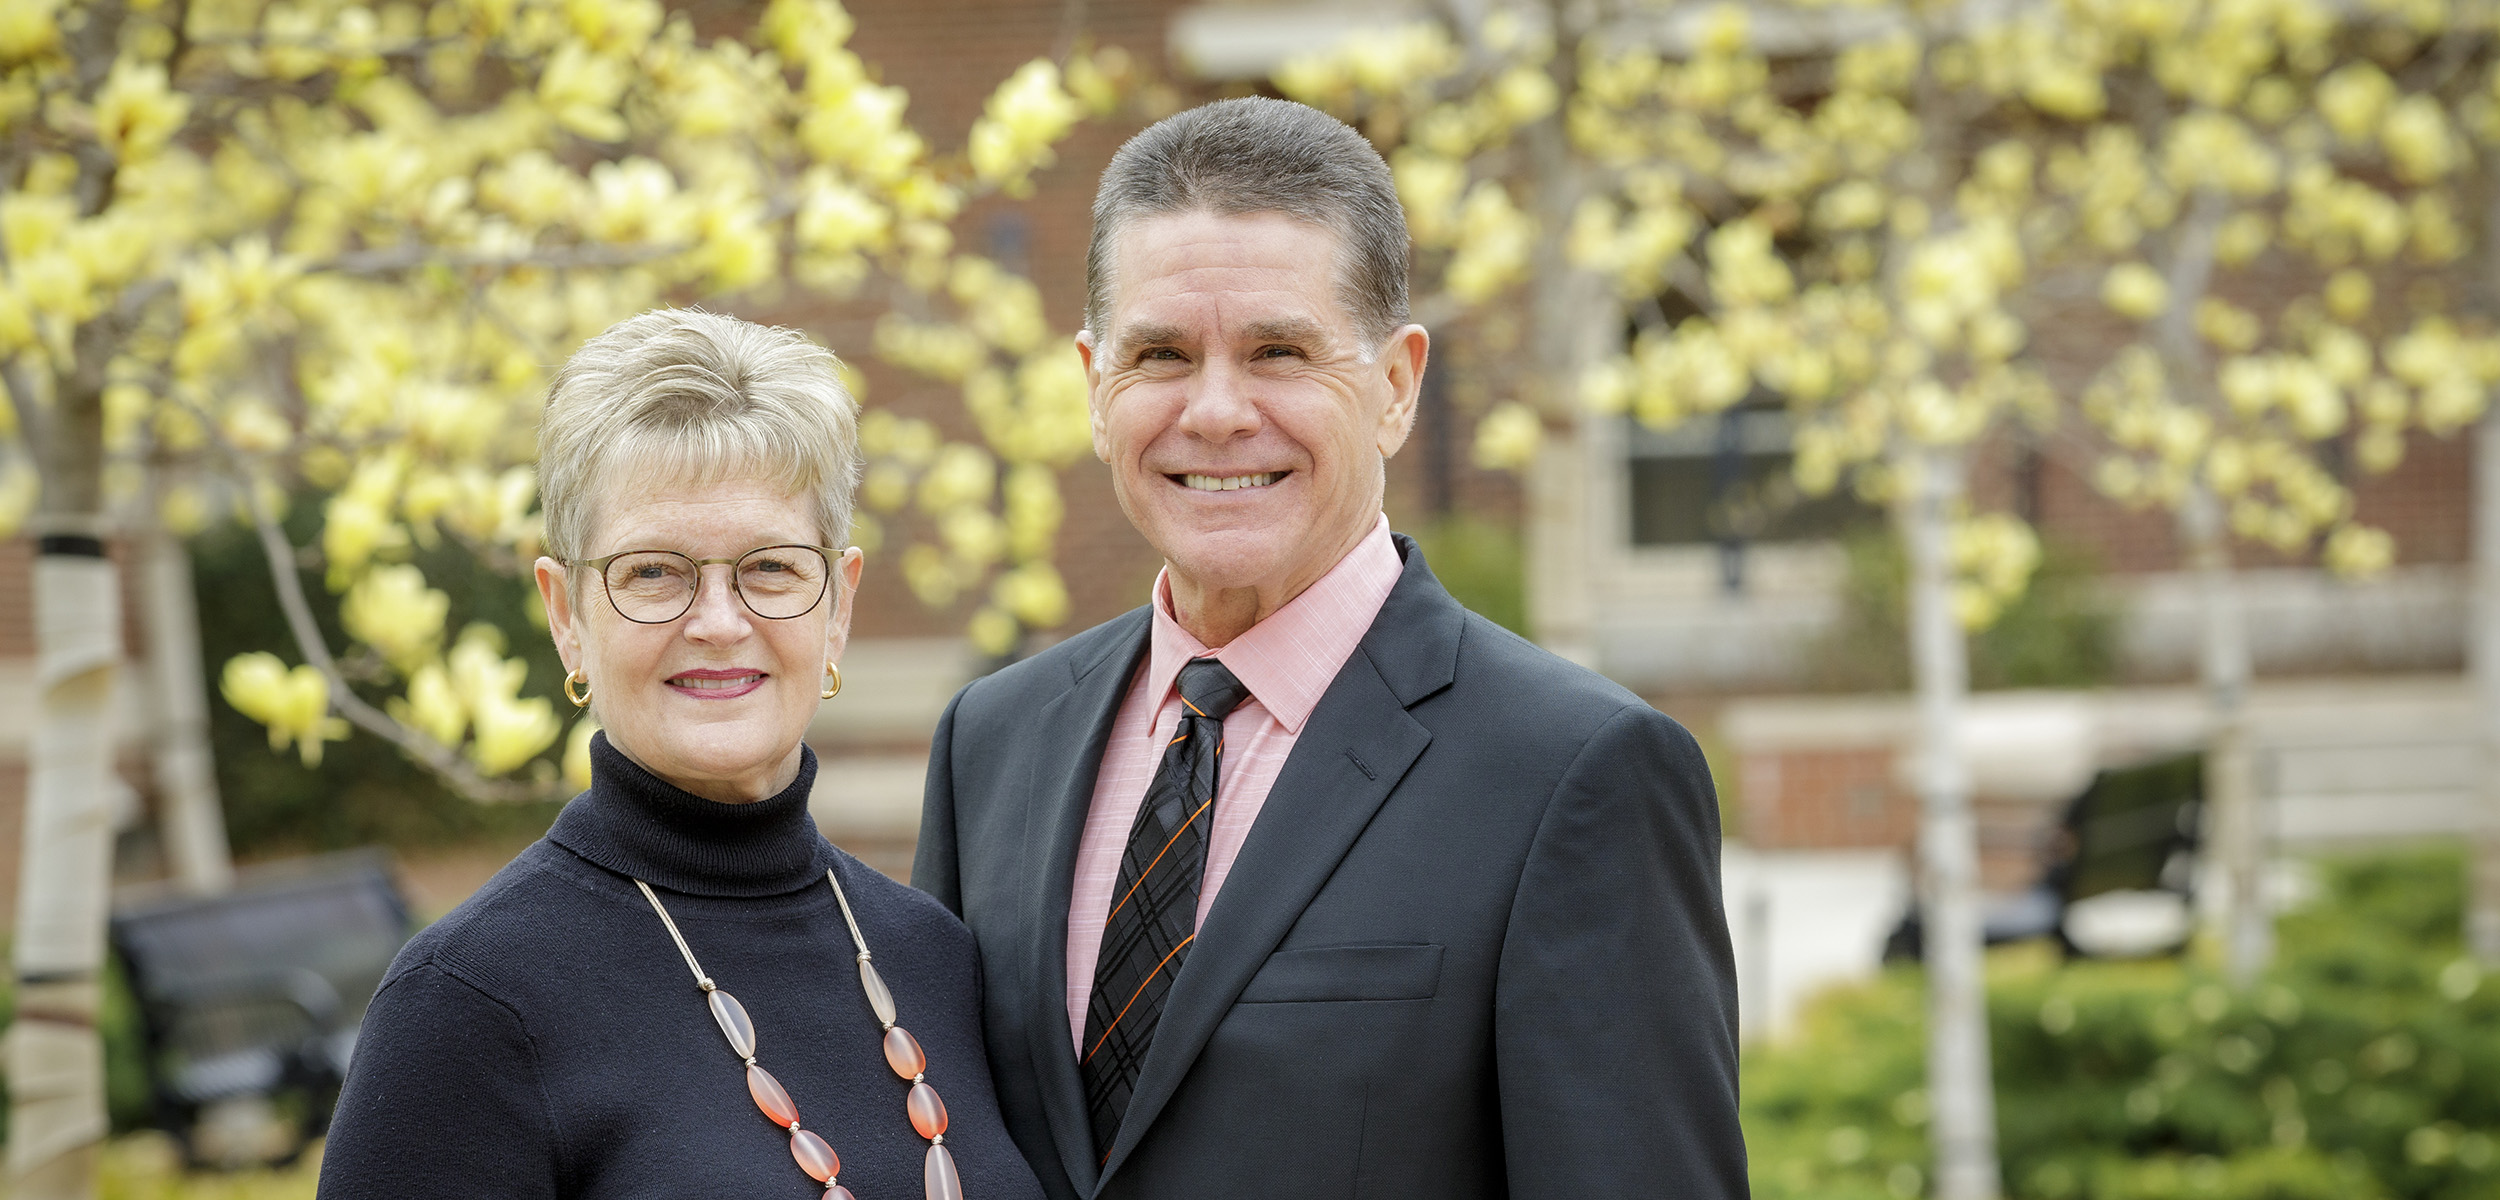 OSU President Burns hargis and First Cowgirl Ann Hargis have had a tremendous impact in their 13 years at the helm.